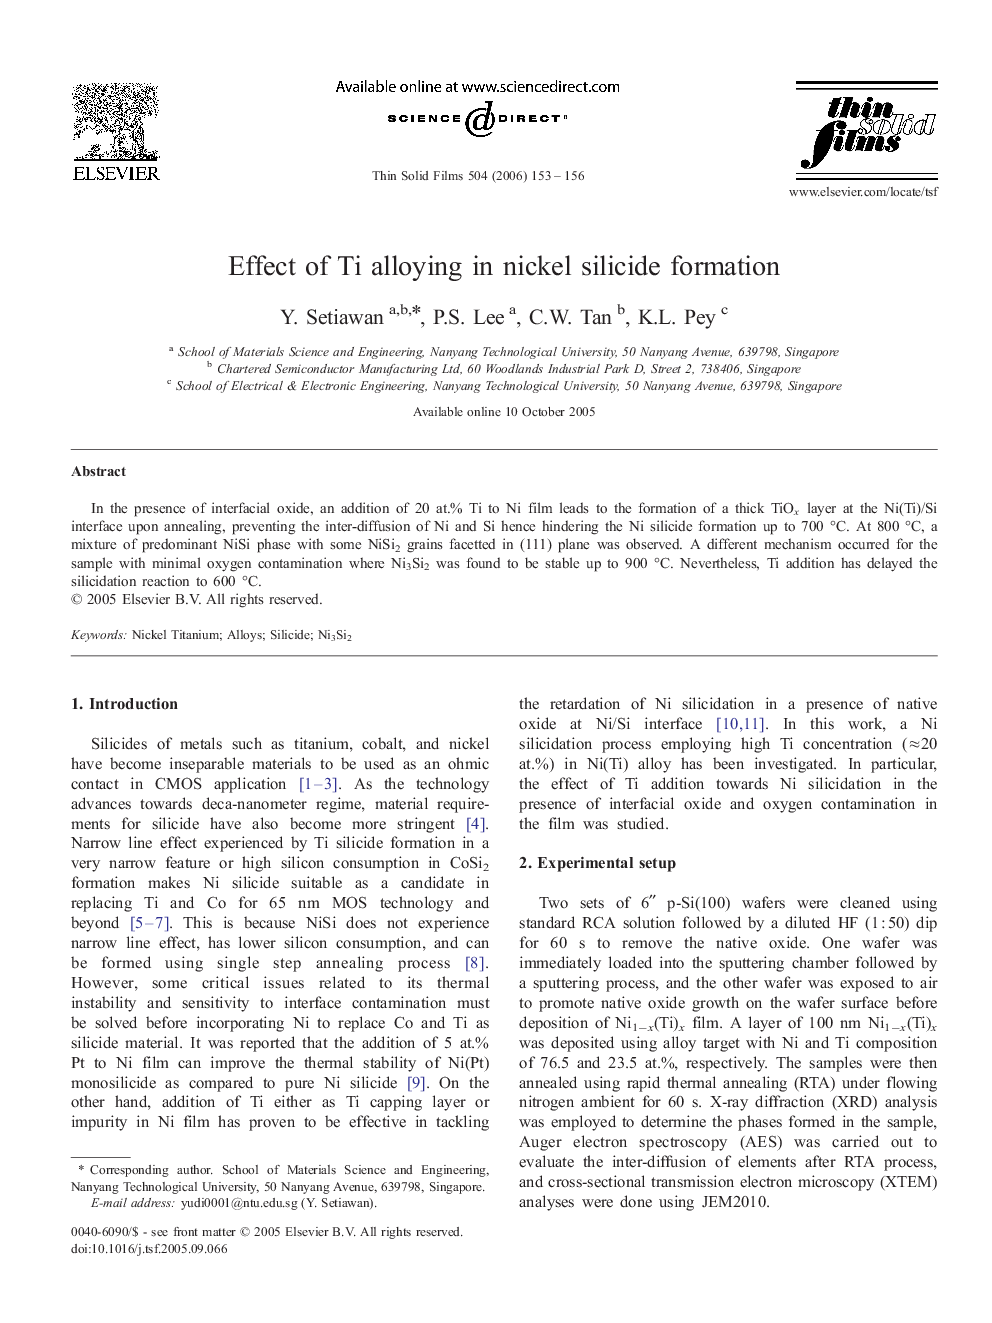 Effect of Ti alloying in nickel silicide formation